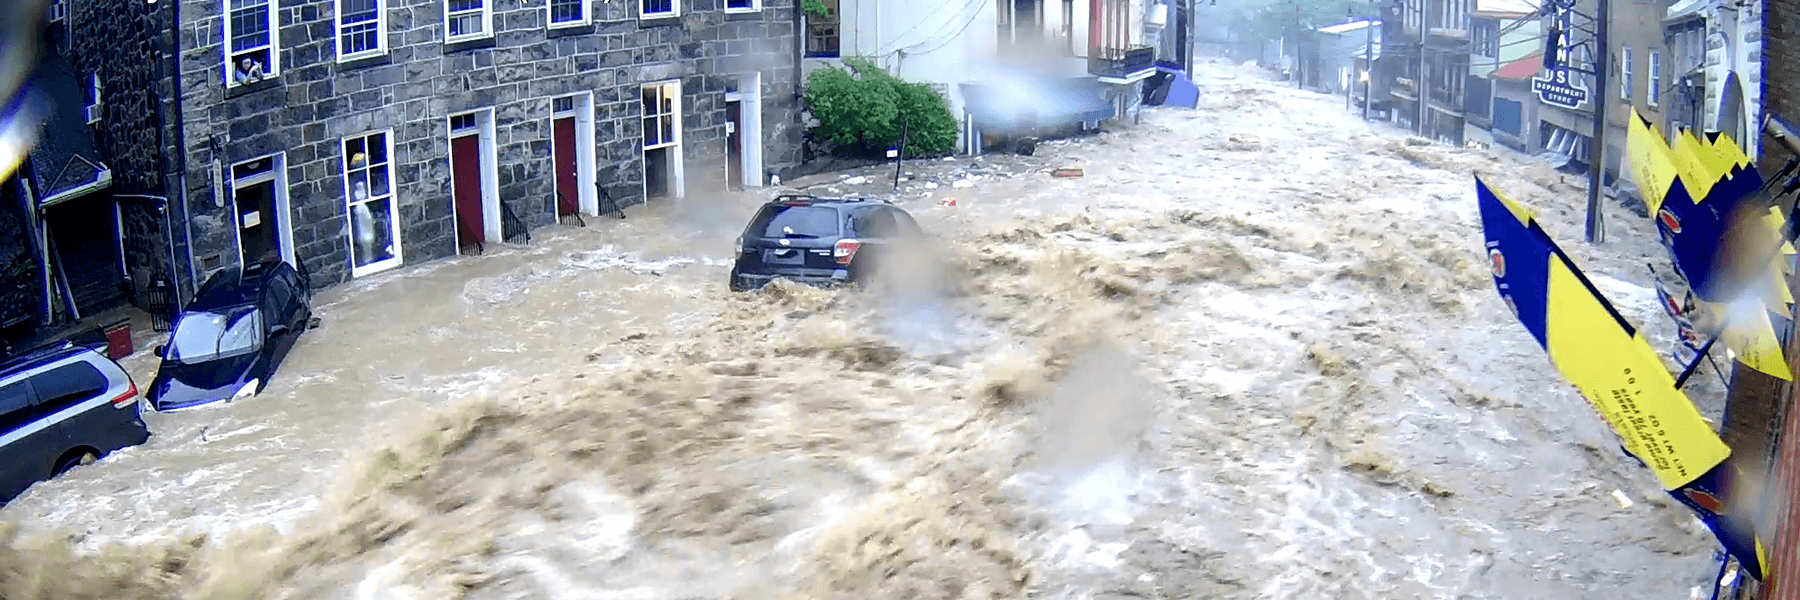 A flooded street during the Ellicott City, MD event. Webcam image provided courtesy Ellicott City Unilux Camera Network/Ron Peters